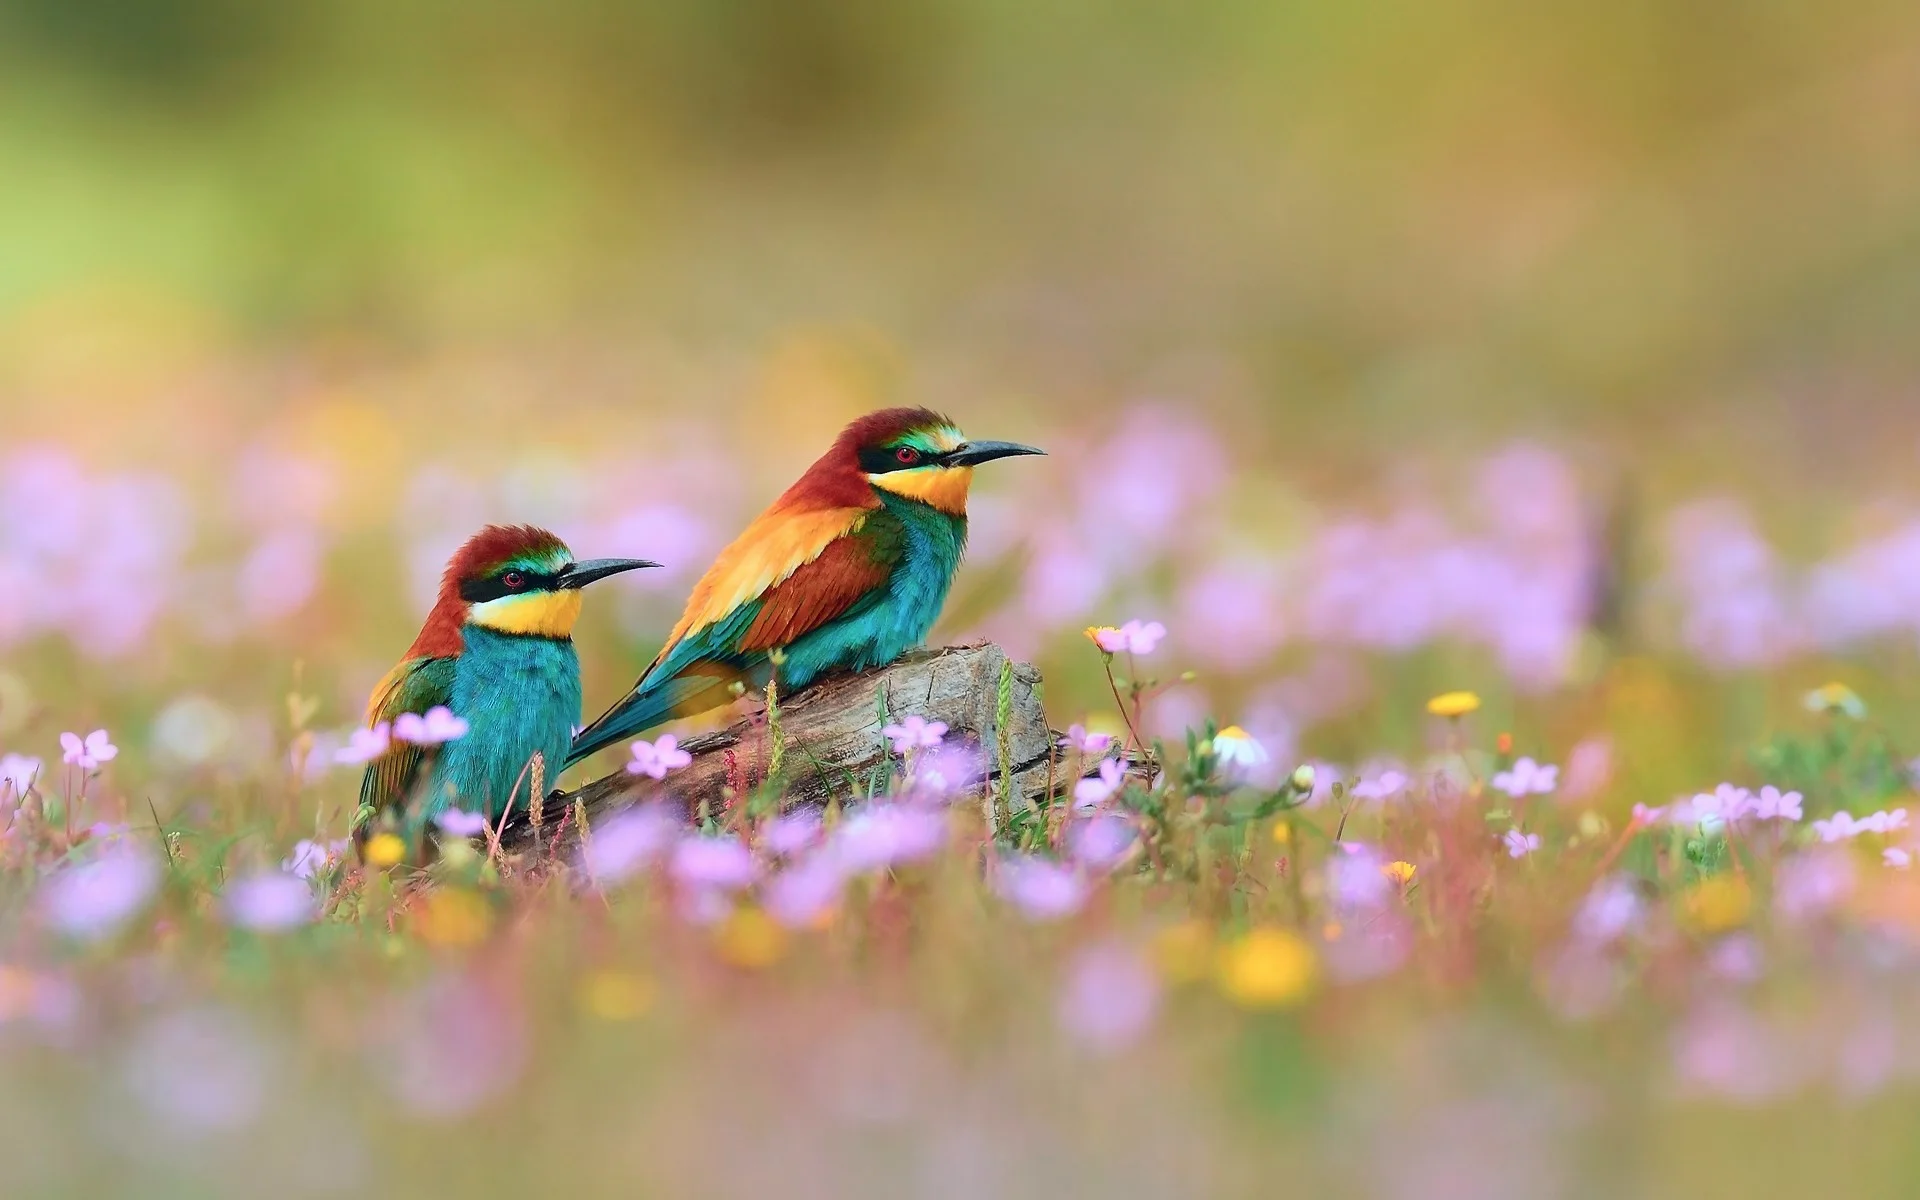 Spring Flowers And Birds Wallpaper Pictures 5 HD Wallpapers